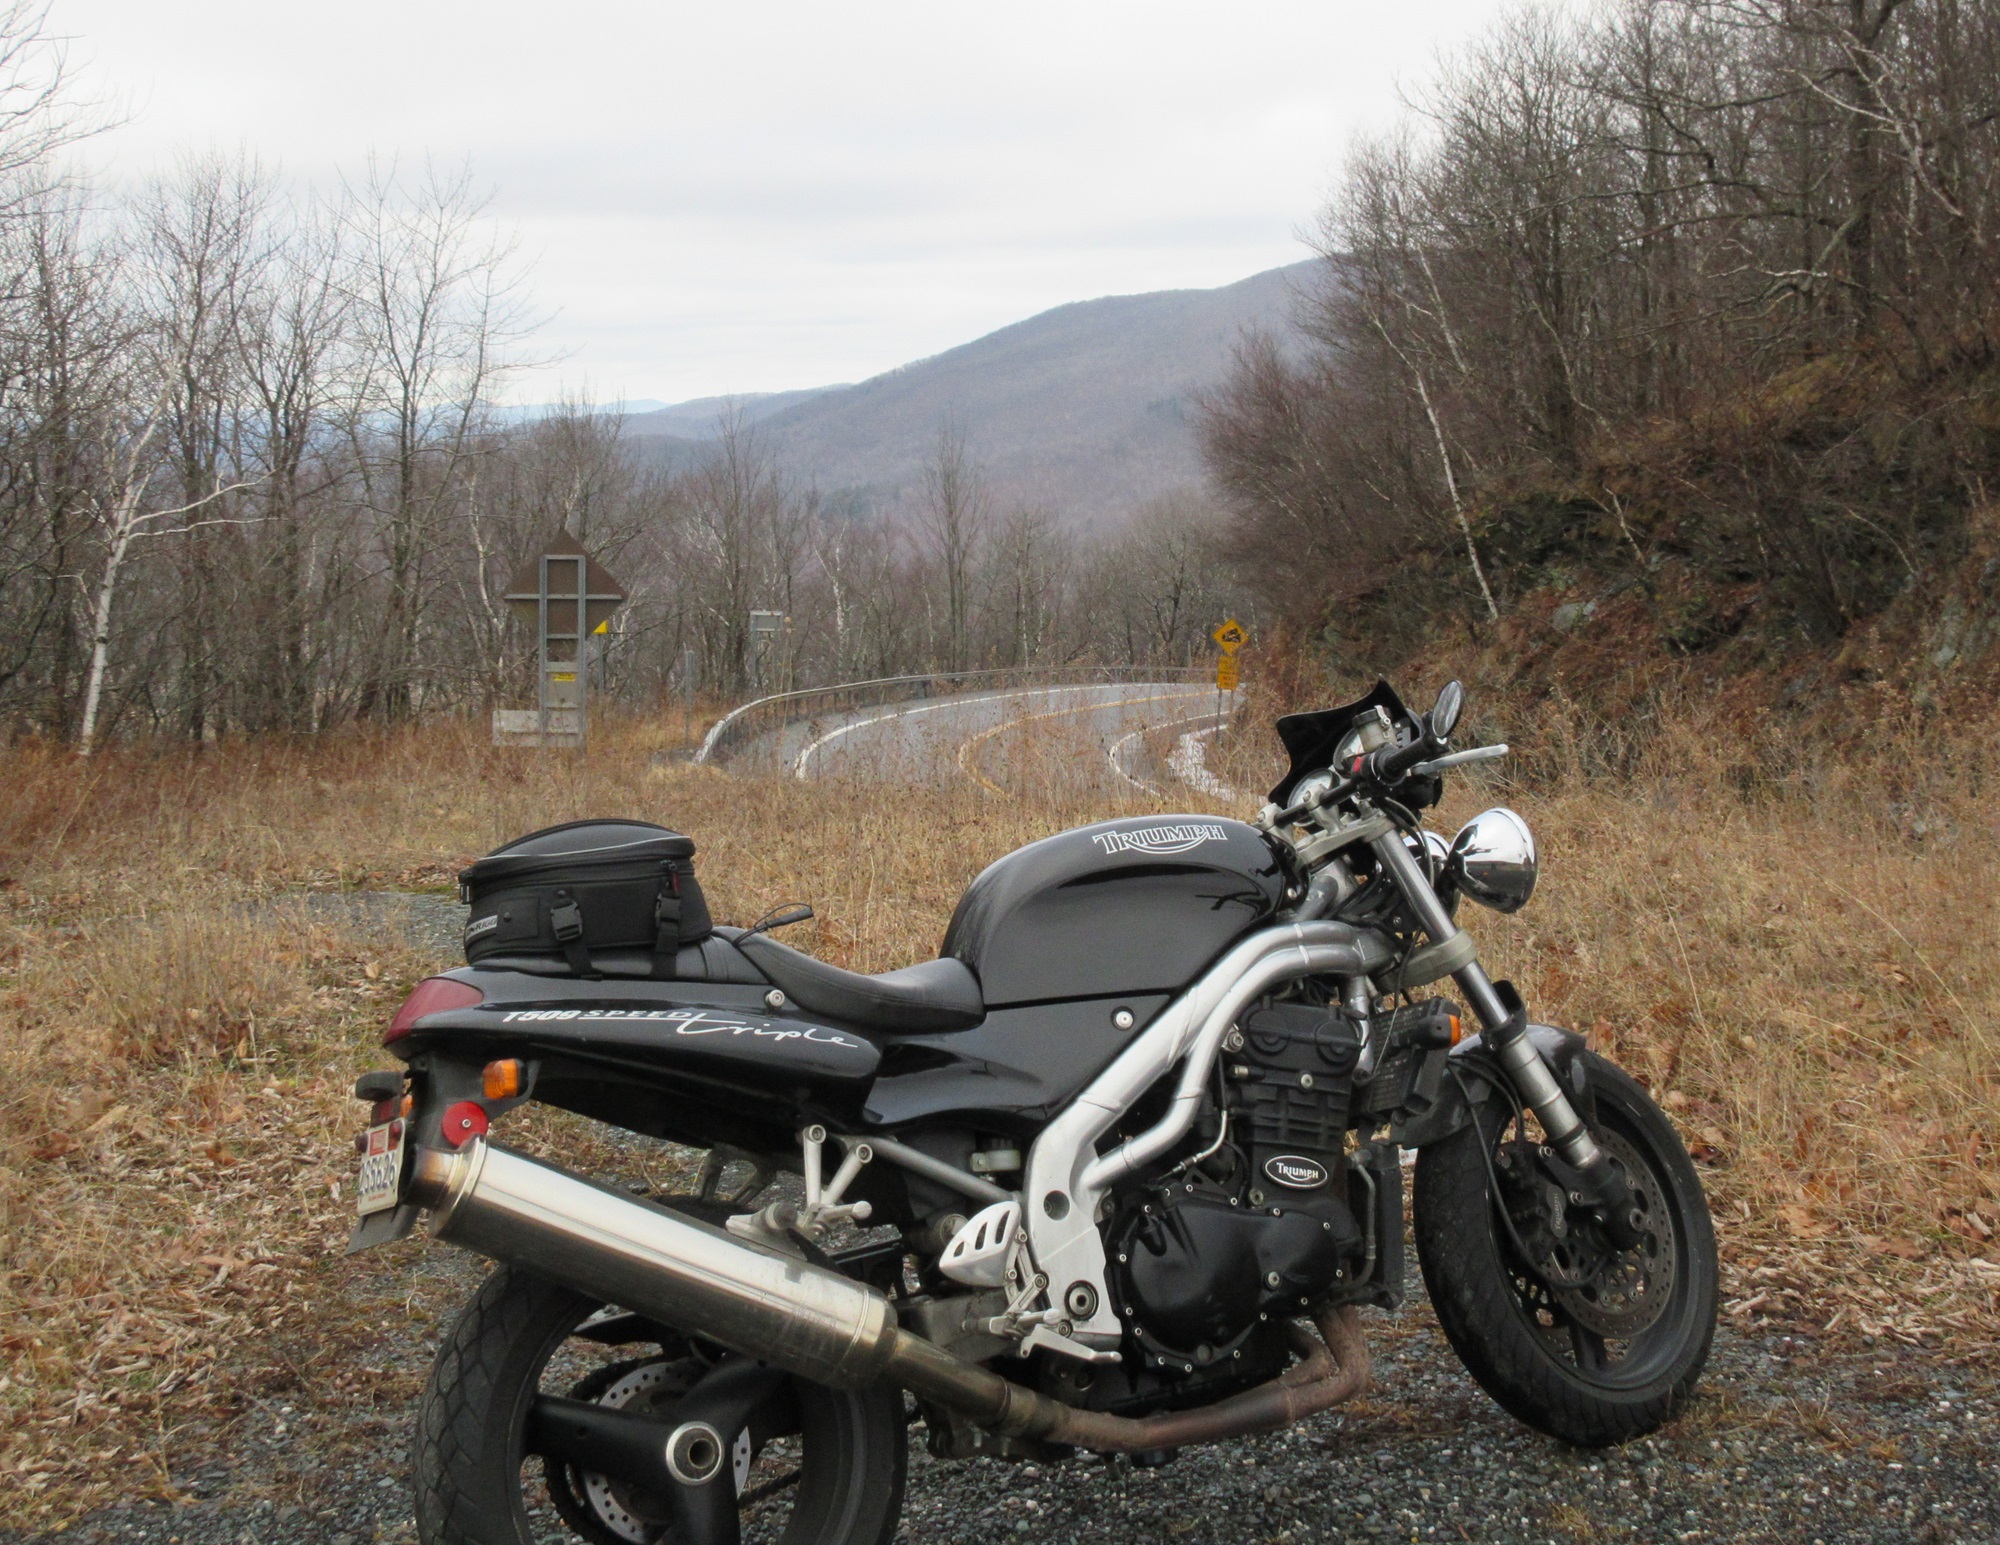 Speed Triple with Dunlop Mutant tires parked on a mountain overlook under gray winter sky